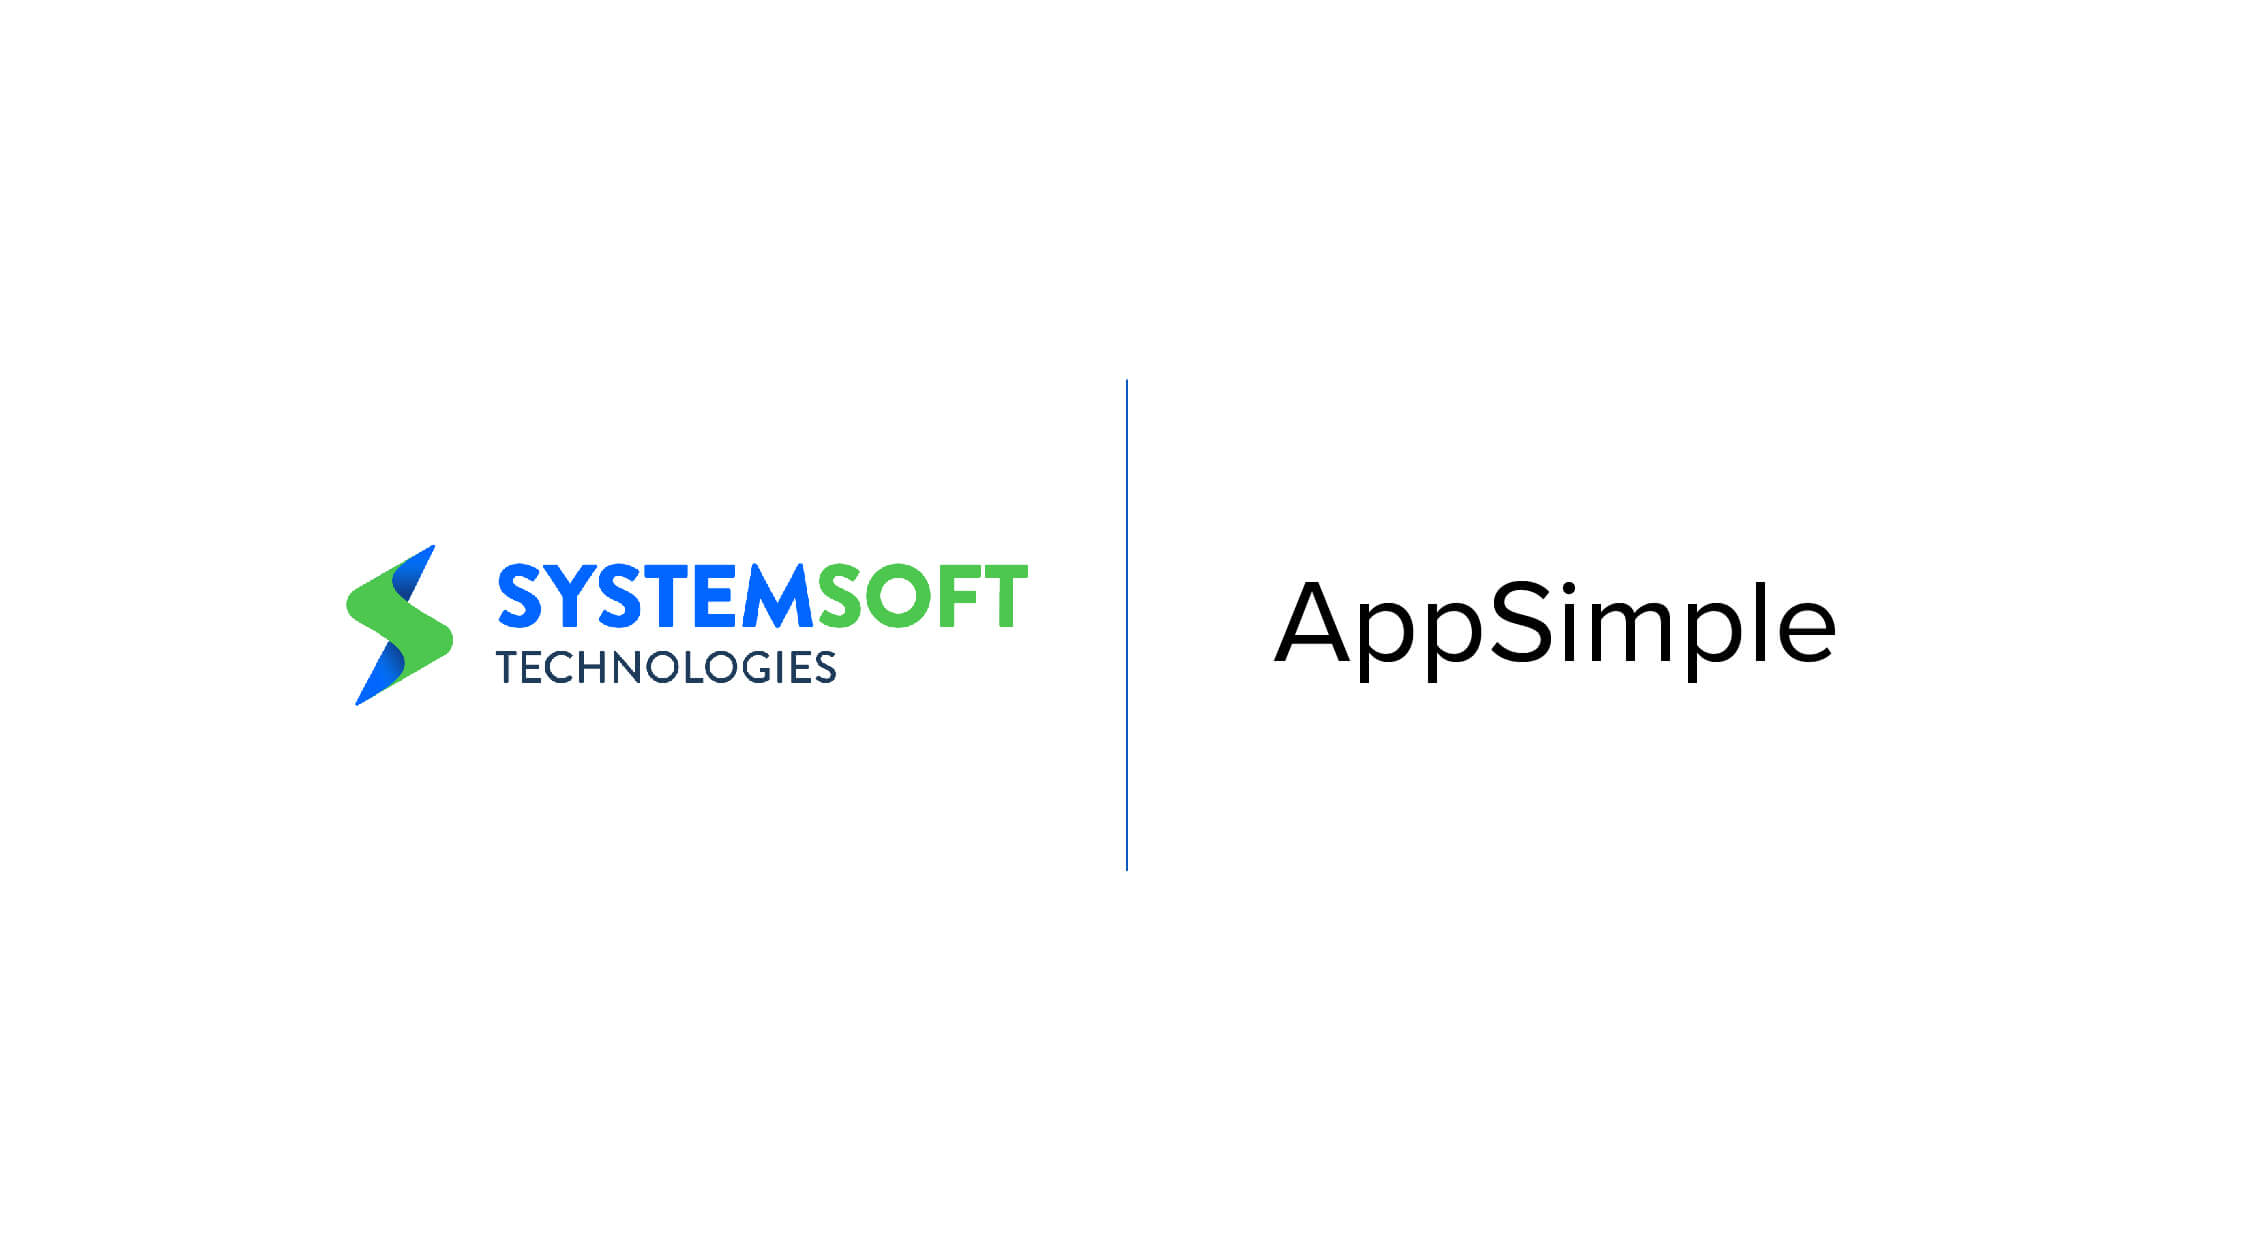 Systemsoft technologies and AppSimple partnership